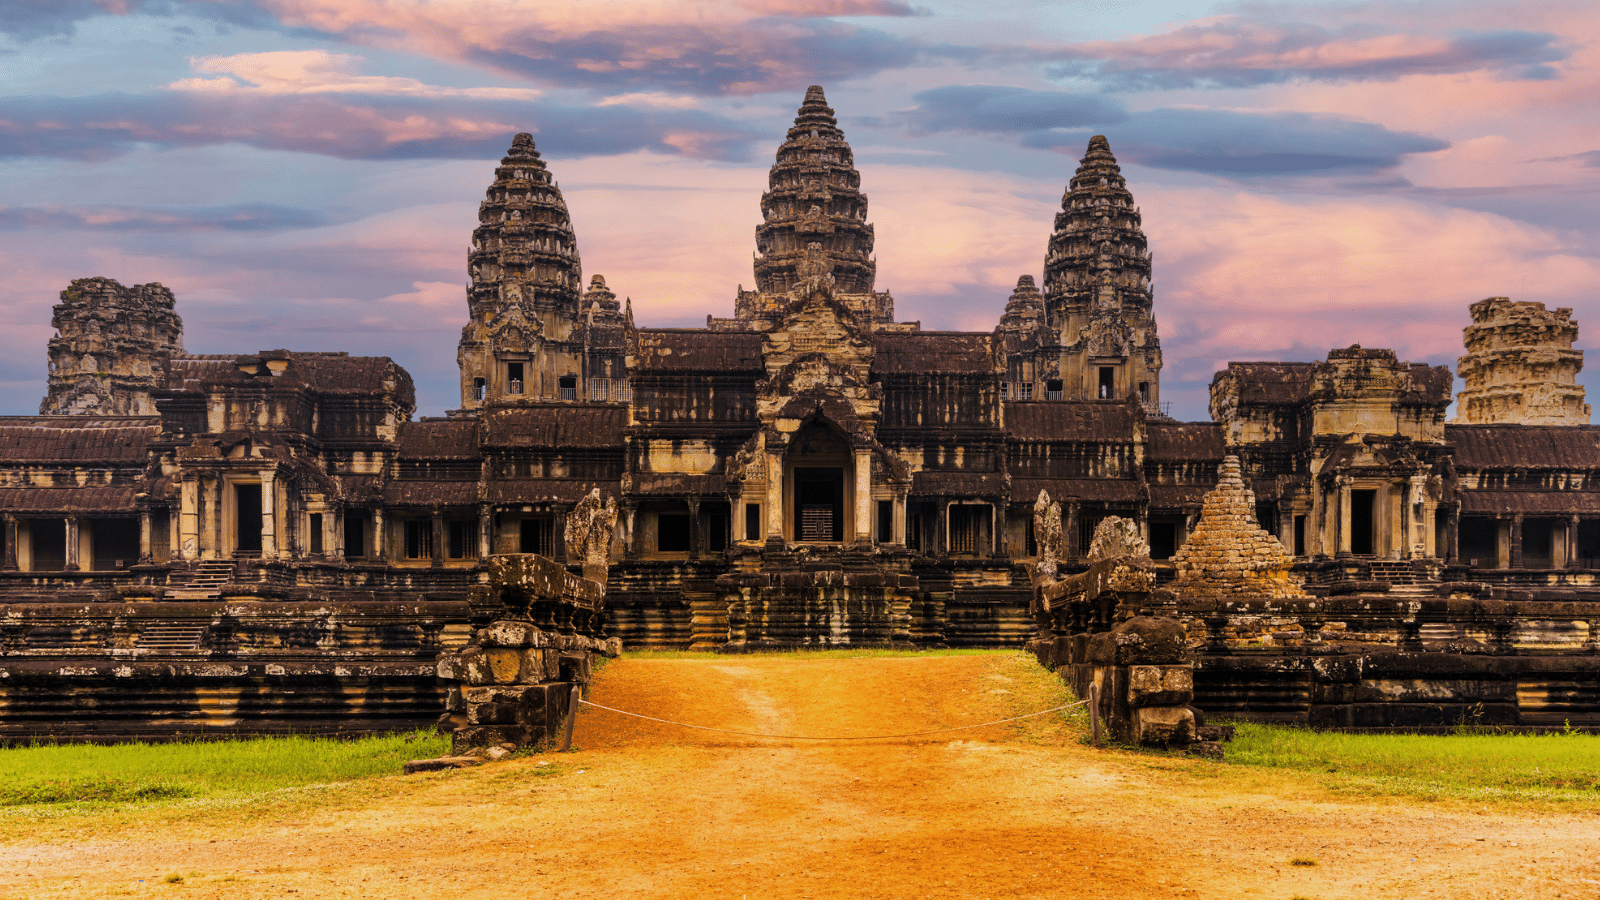 <p><span>Angkor Wat in Cambodia is the world’s largest religious monument and a popular tourist attraction. This incredible temple complex is a true masterpiece of Khmer architecture, with its intricate carvings and towering spires. Seeing monks walking and praying at the temple creates a magical experience for visitors. </span></p><ul> <li><a href="https://themoneydreamer.com/travel-deals/">How to Find Great Travel Deals </a></li> </ul>